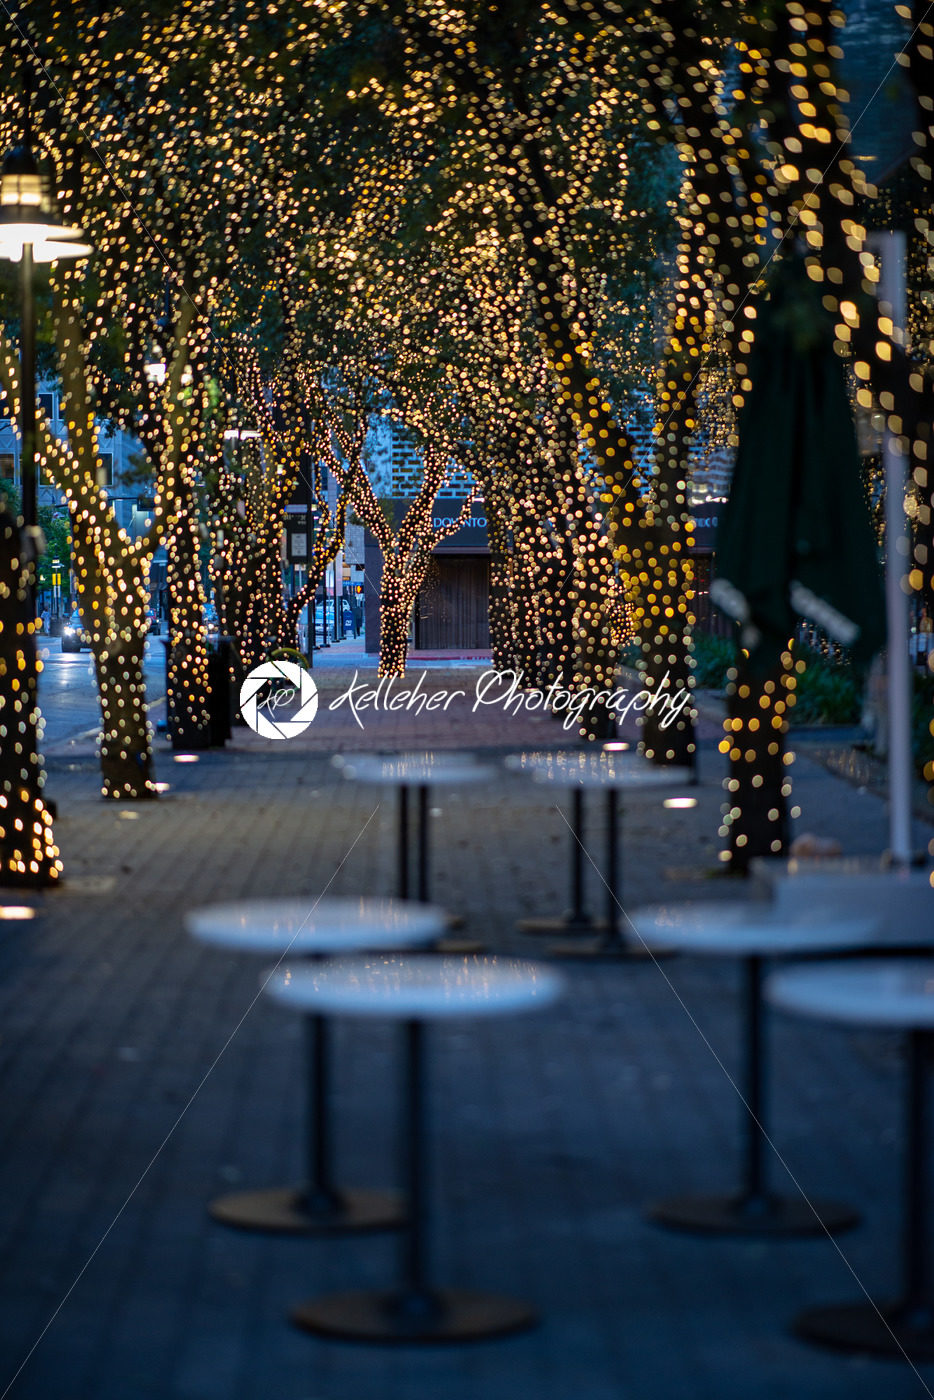 Outdoor restaurant at sunset with trees illuminated with holiday lights - Kelleher Photography Store